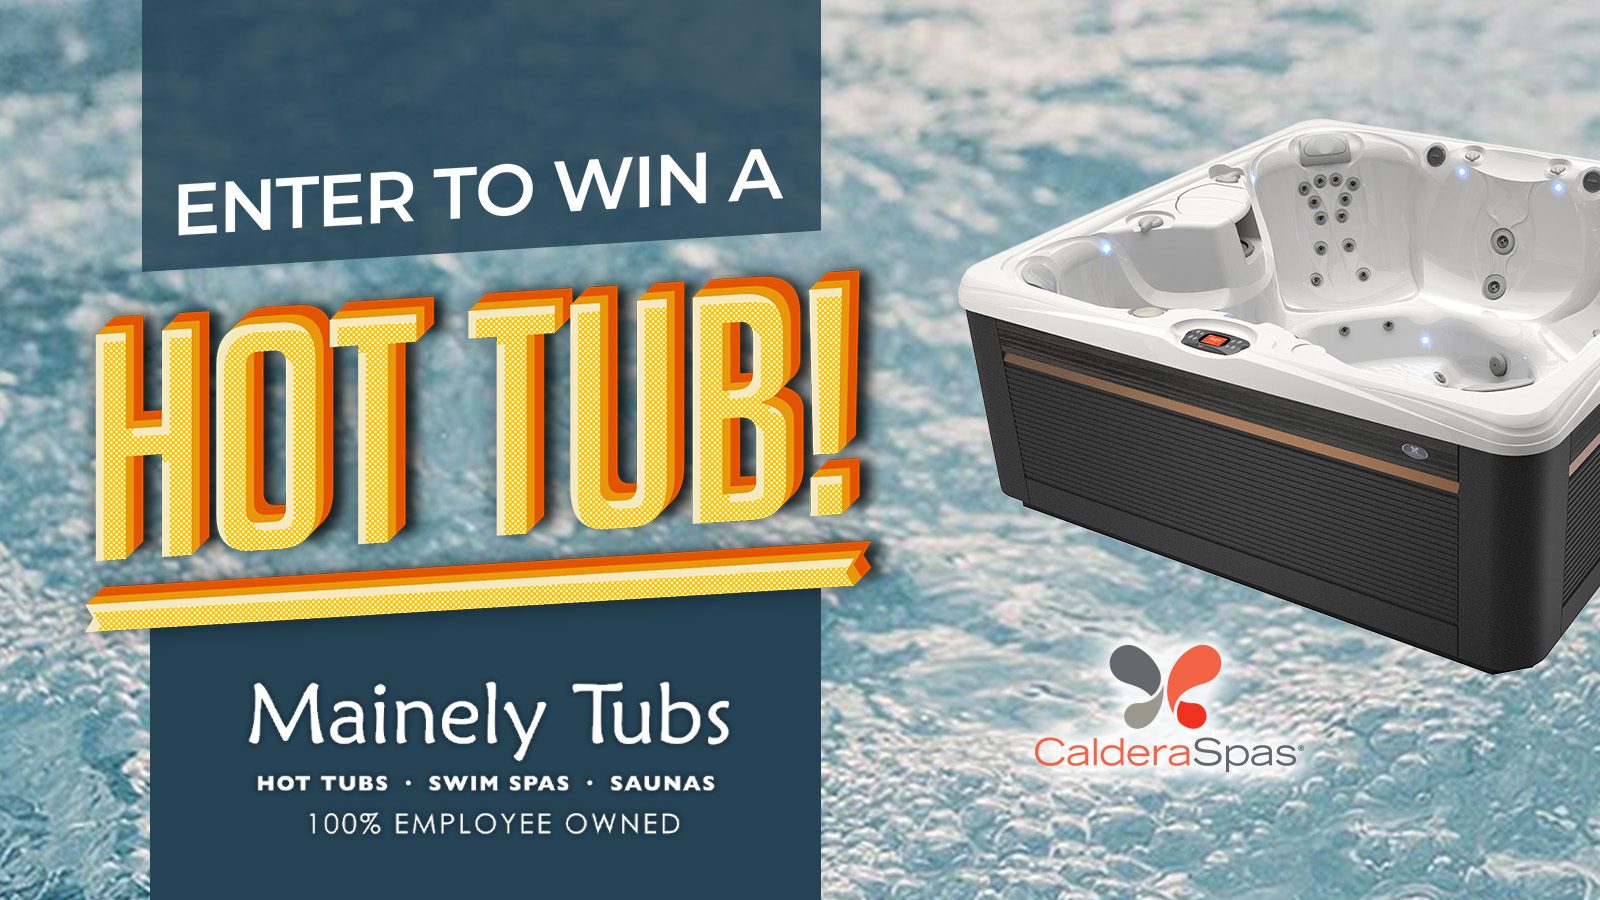 Win a $22,000 Hot Tub From Mainely Tubs!